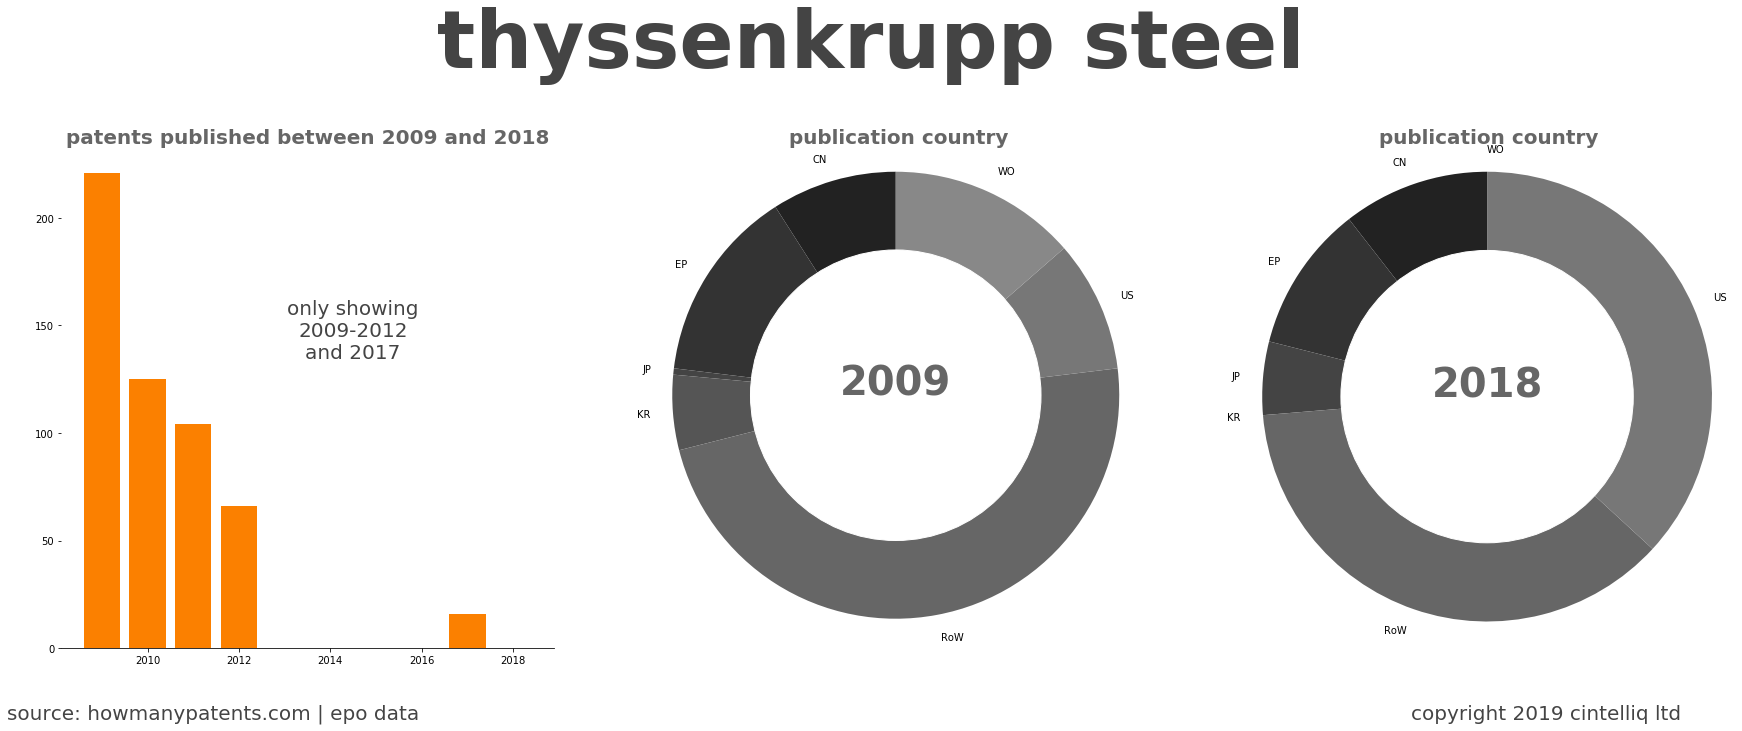 summary of patents for Thyssenkrupp Steel